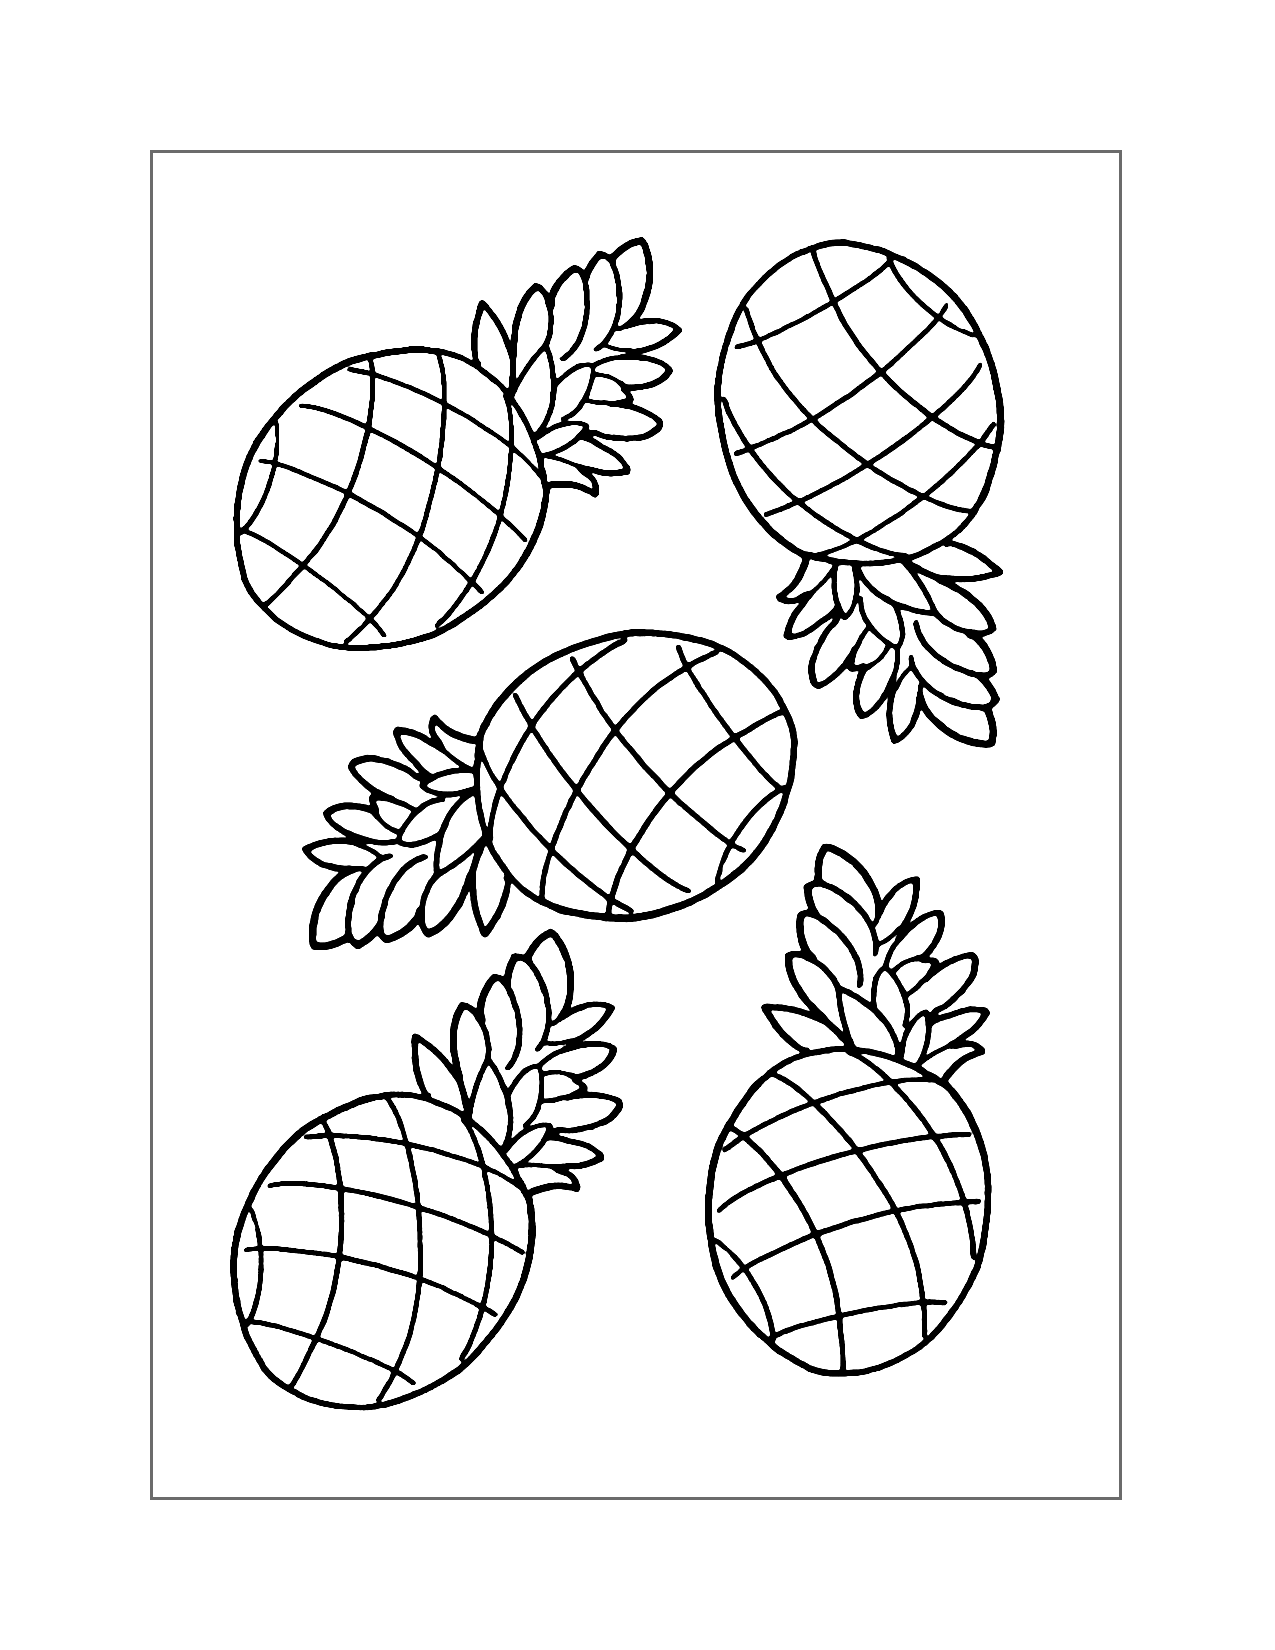 Pineapples Coloring Page